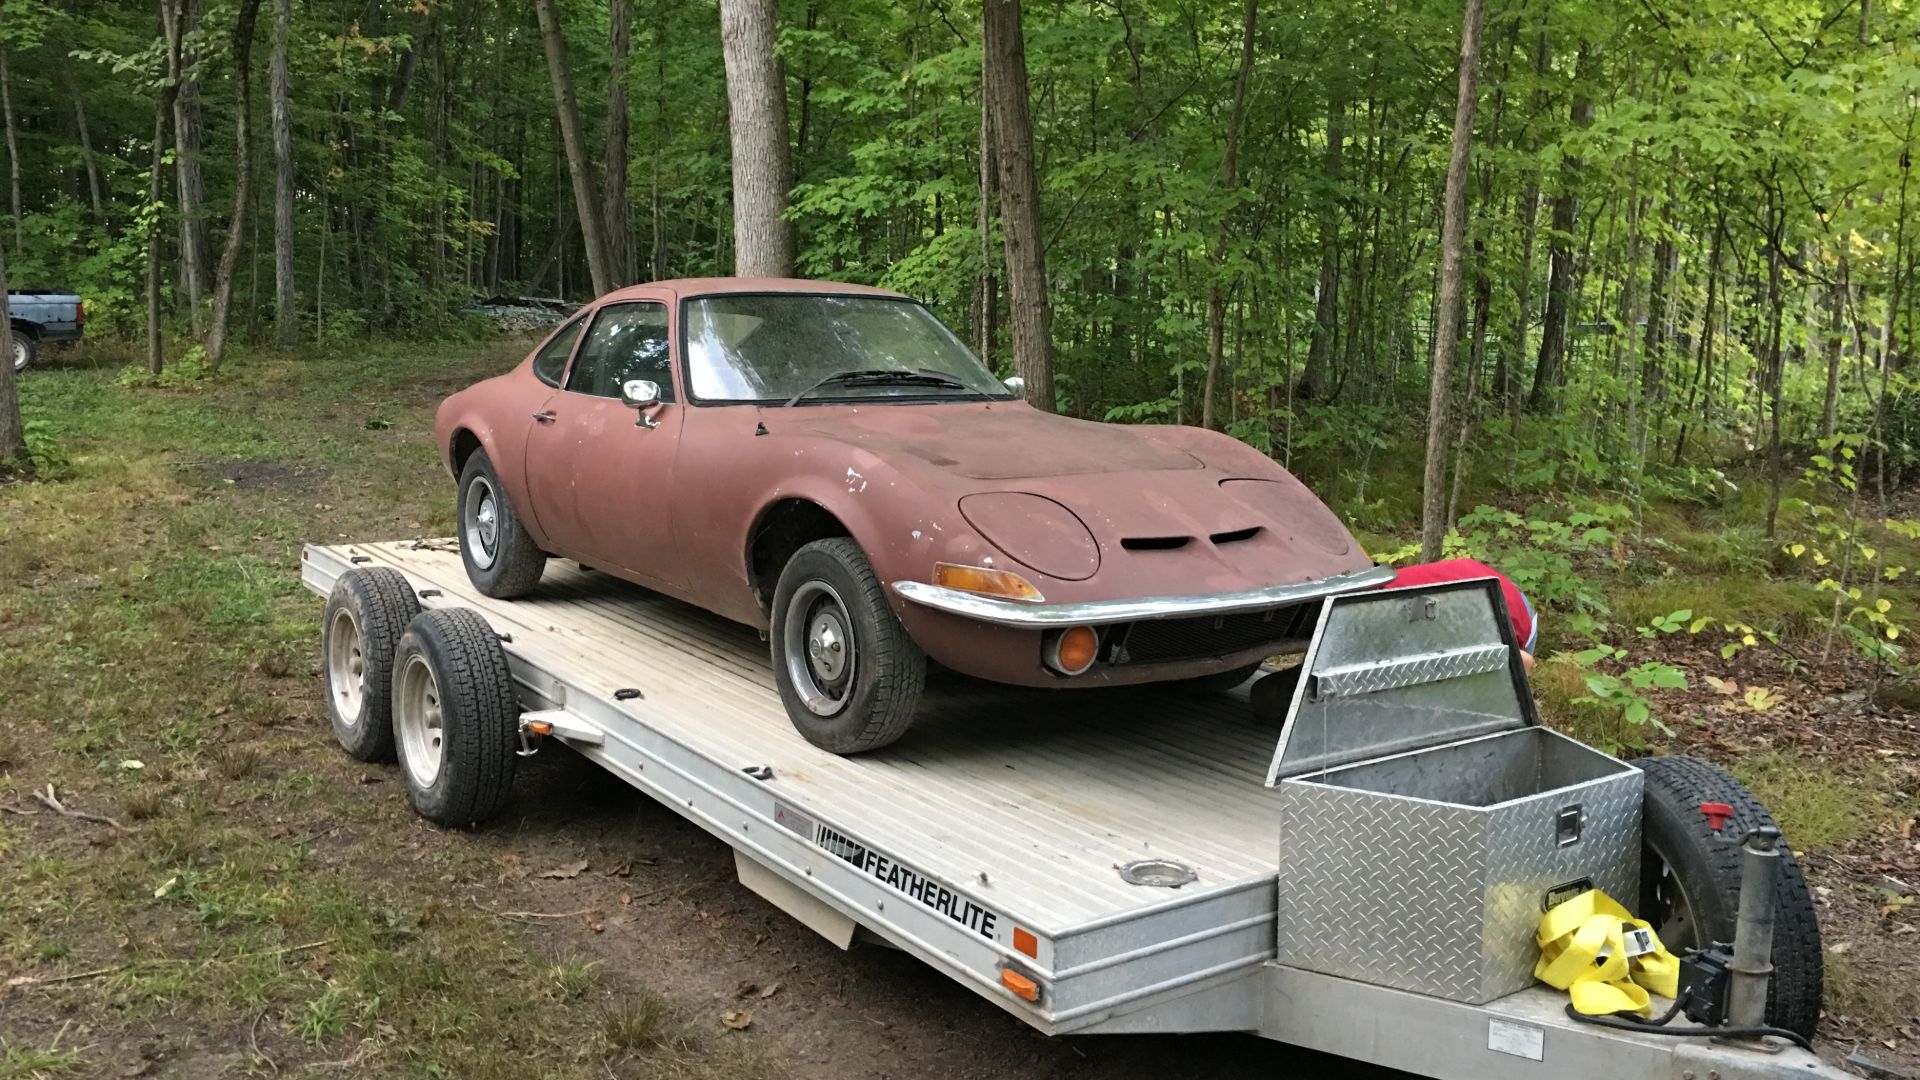 G&G’s Project Cars: Introducing Tony’s 1970 Opel GT